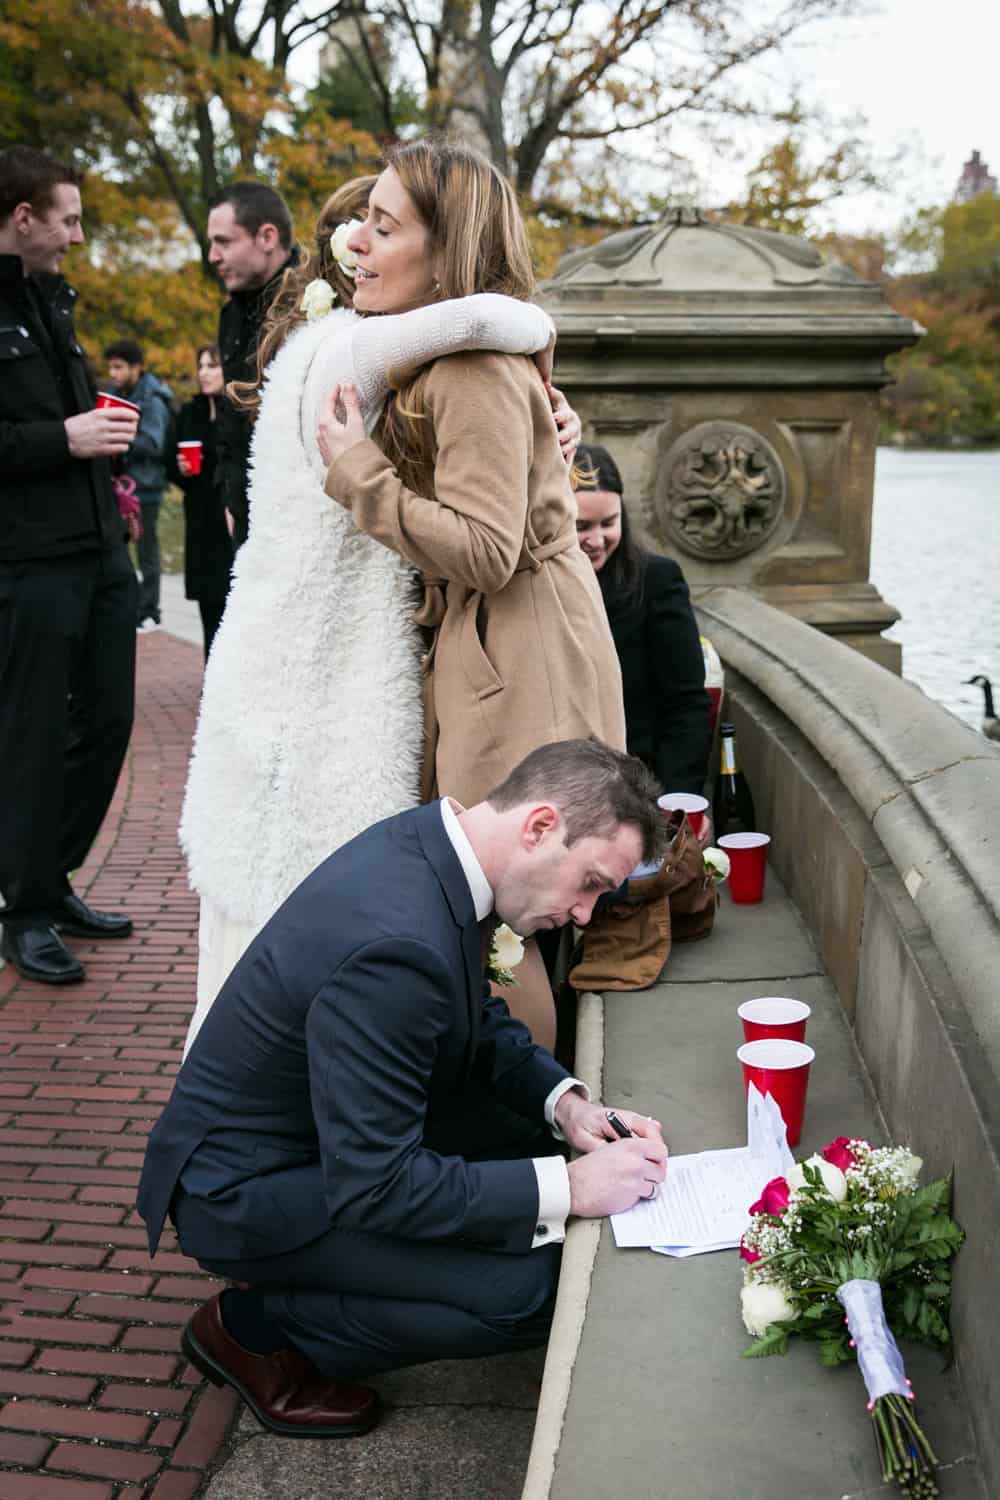 Bride hugging guest and groom signing marriage license on stone seat